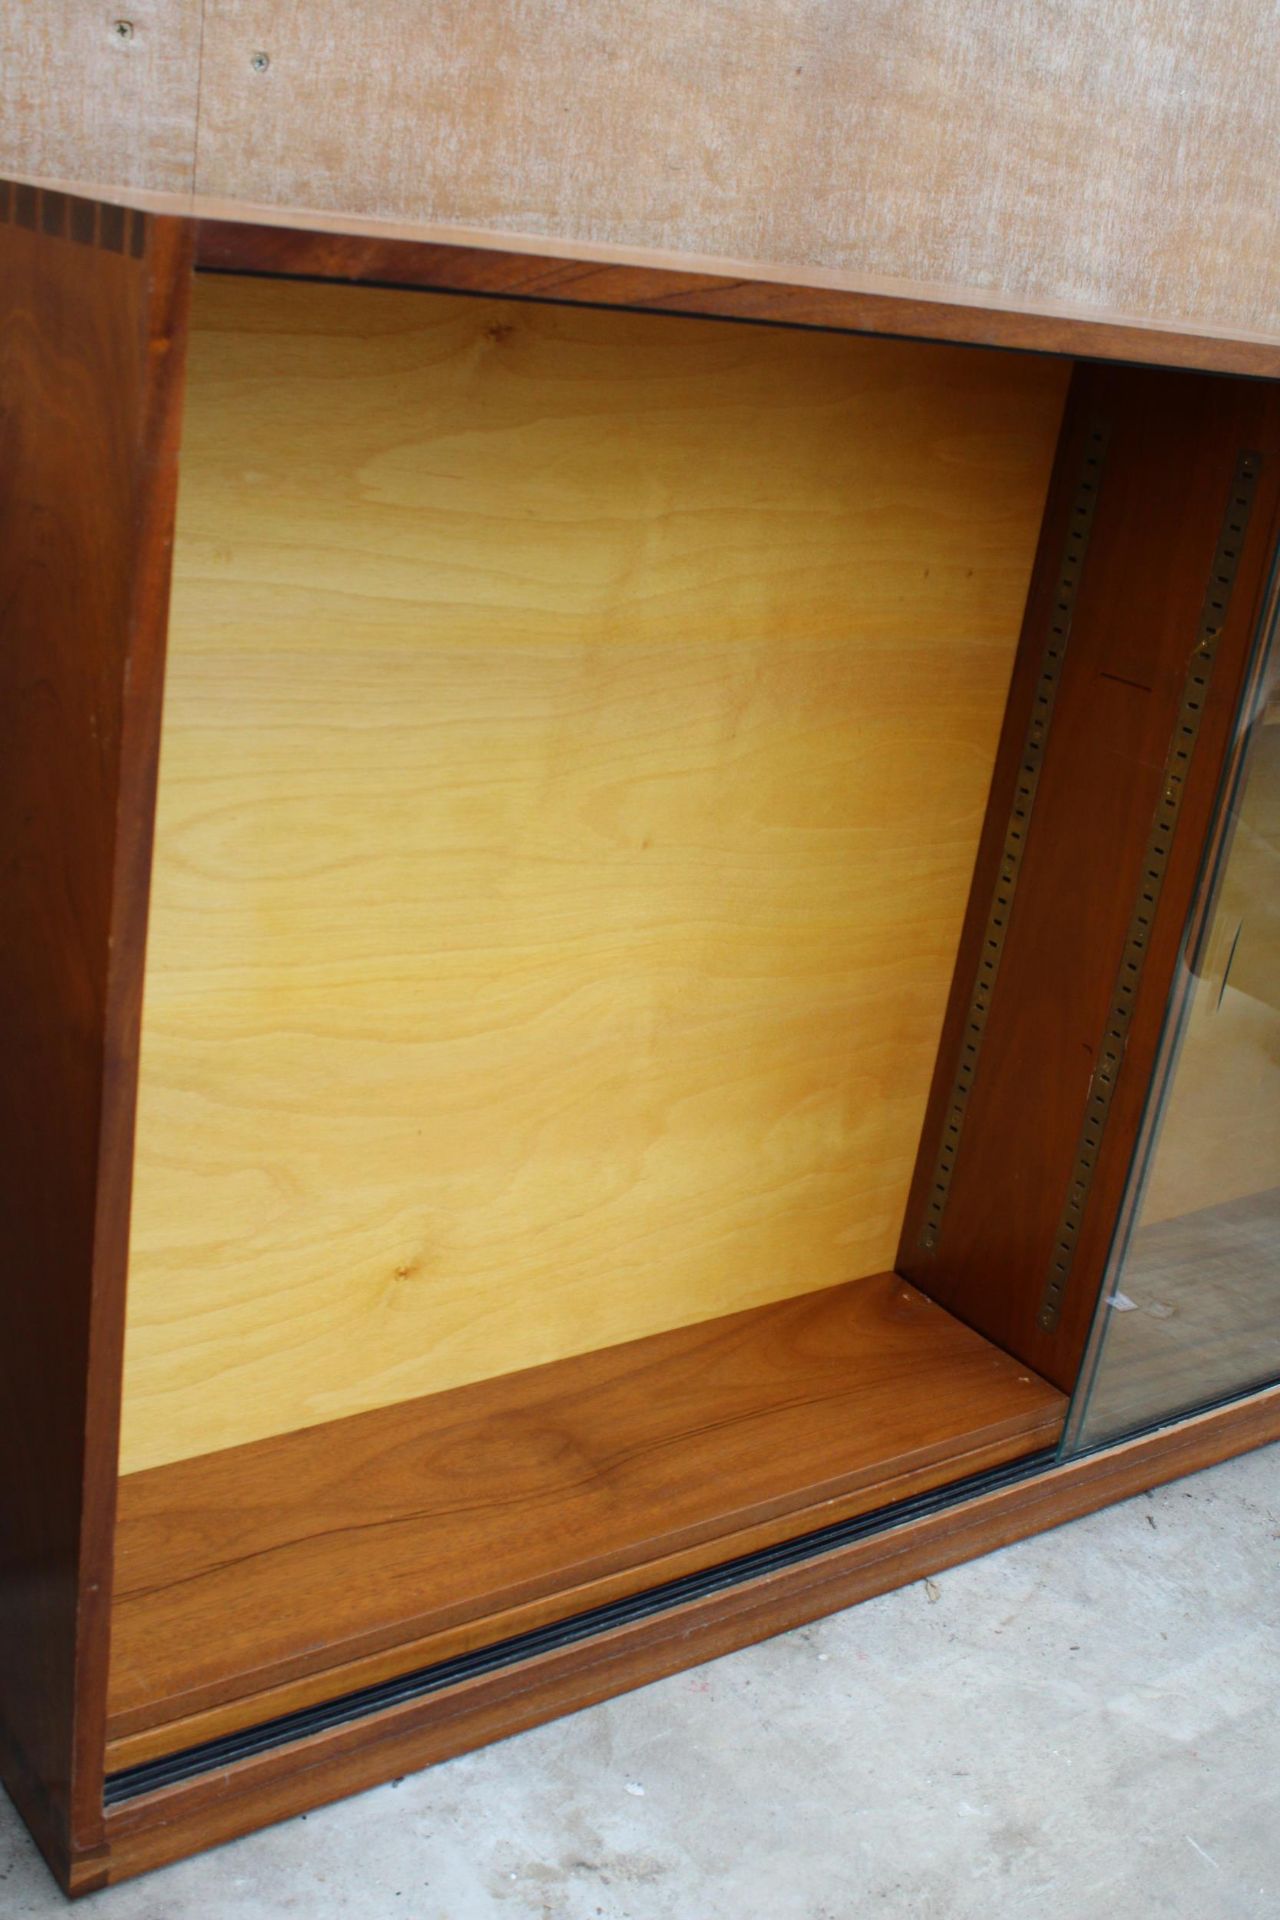 A RETRO TEAK BOOKCASE WITH TWO SLIDING DOORS 59" WIDE - Image 2 of 3